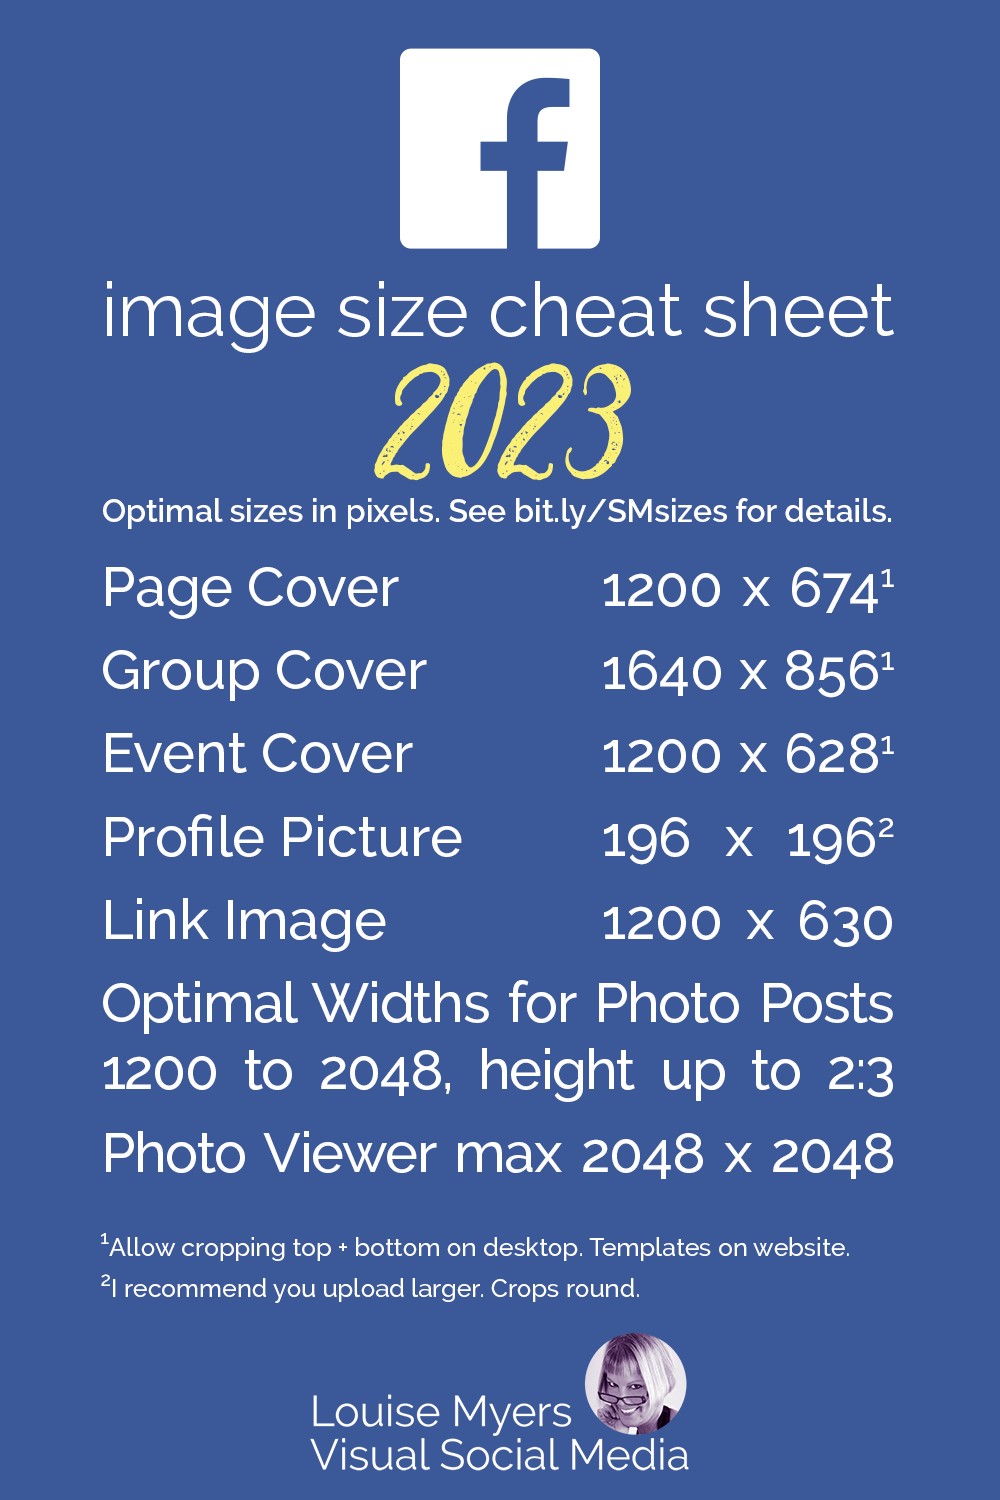 Facebook image sizes chart on blue graphic with FB logo.